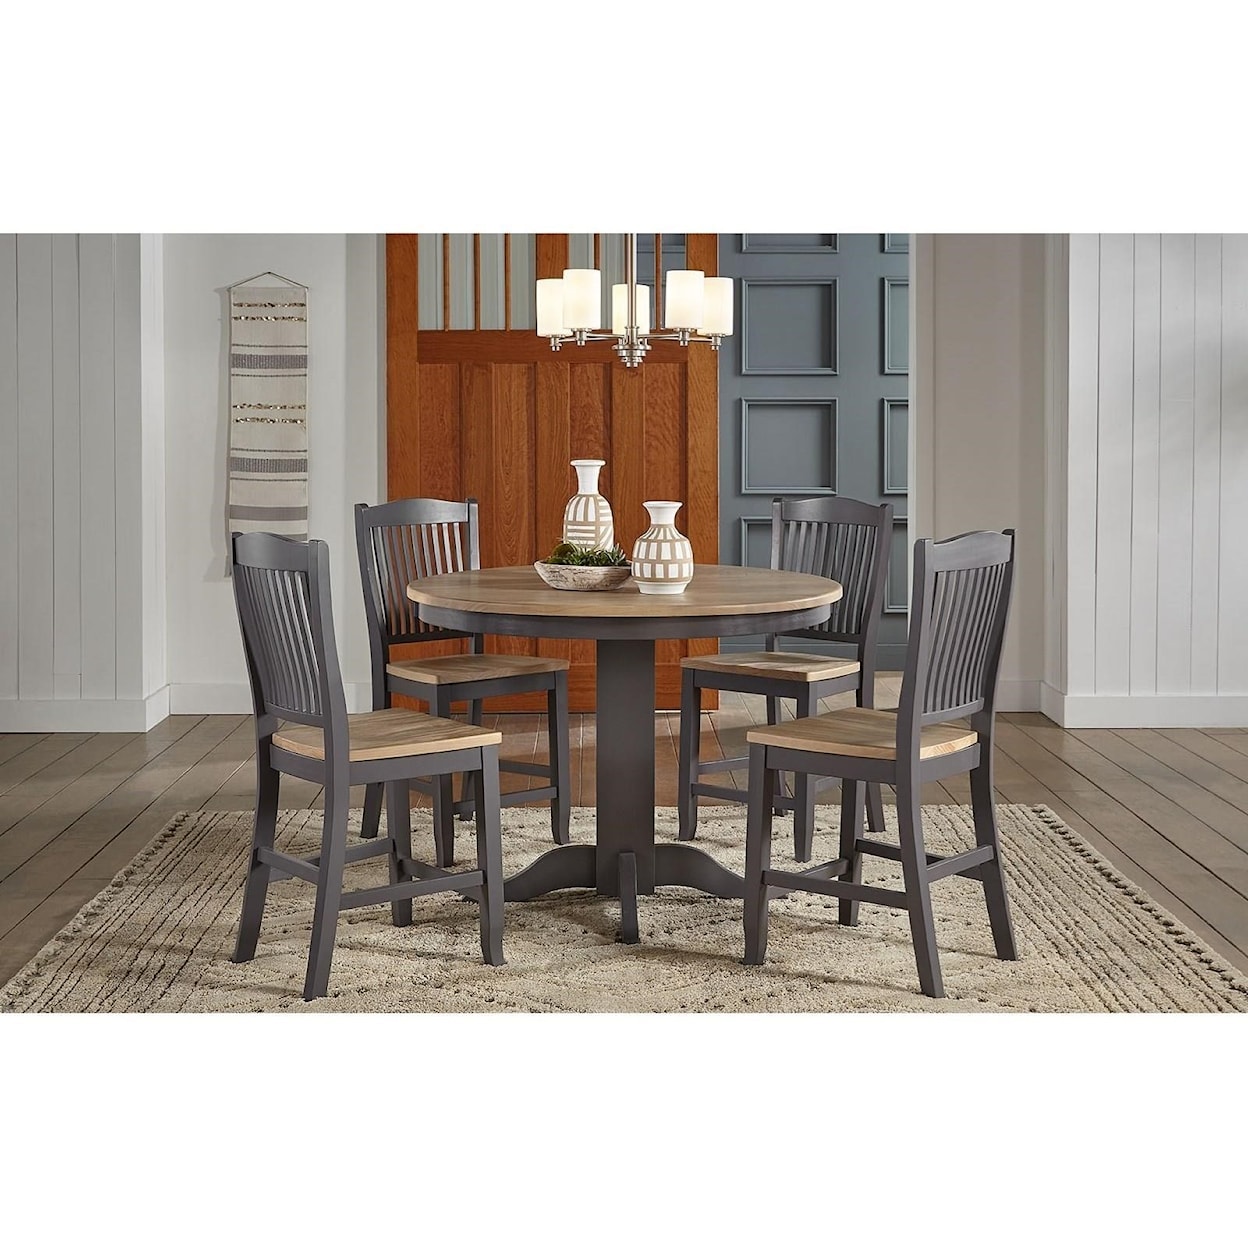 AAmerica Port Townsend Gather Height Pedestal Table